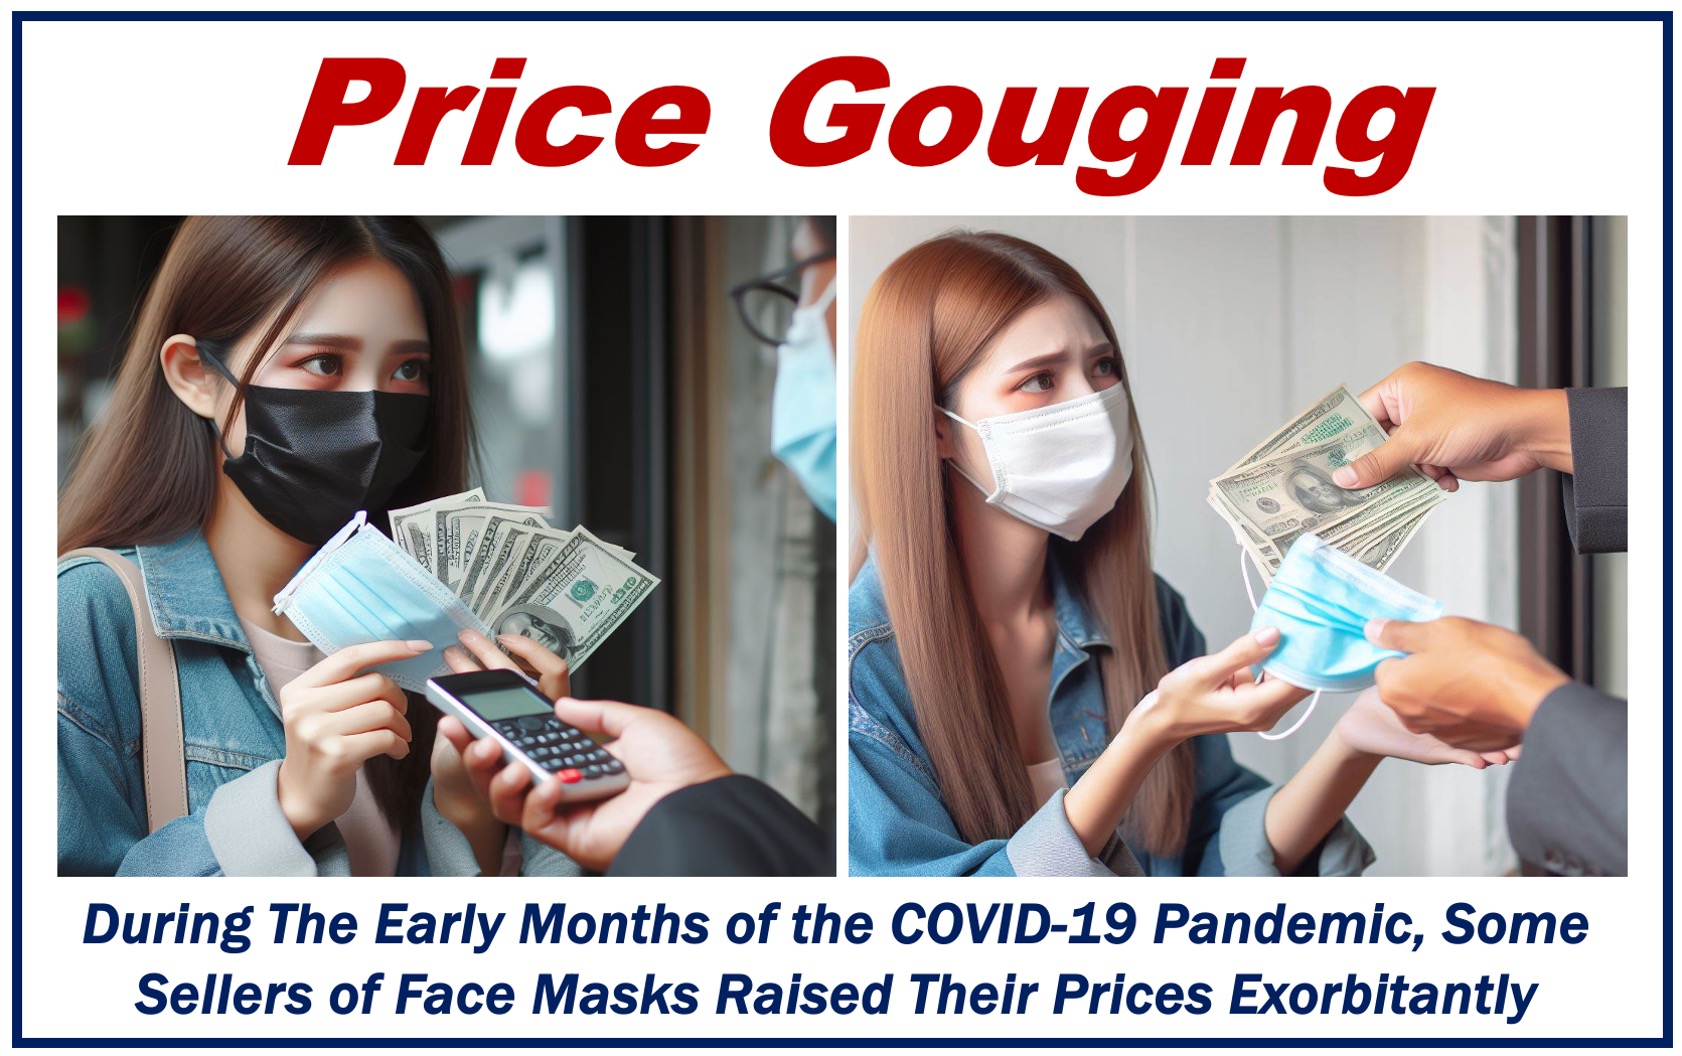 Two female consumers paying exorbitant prices for face masks - depiction of price gouging.